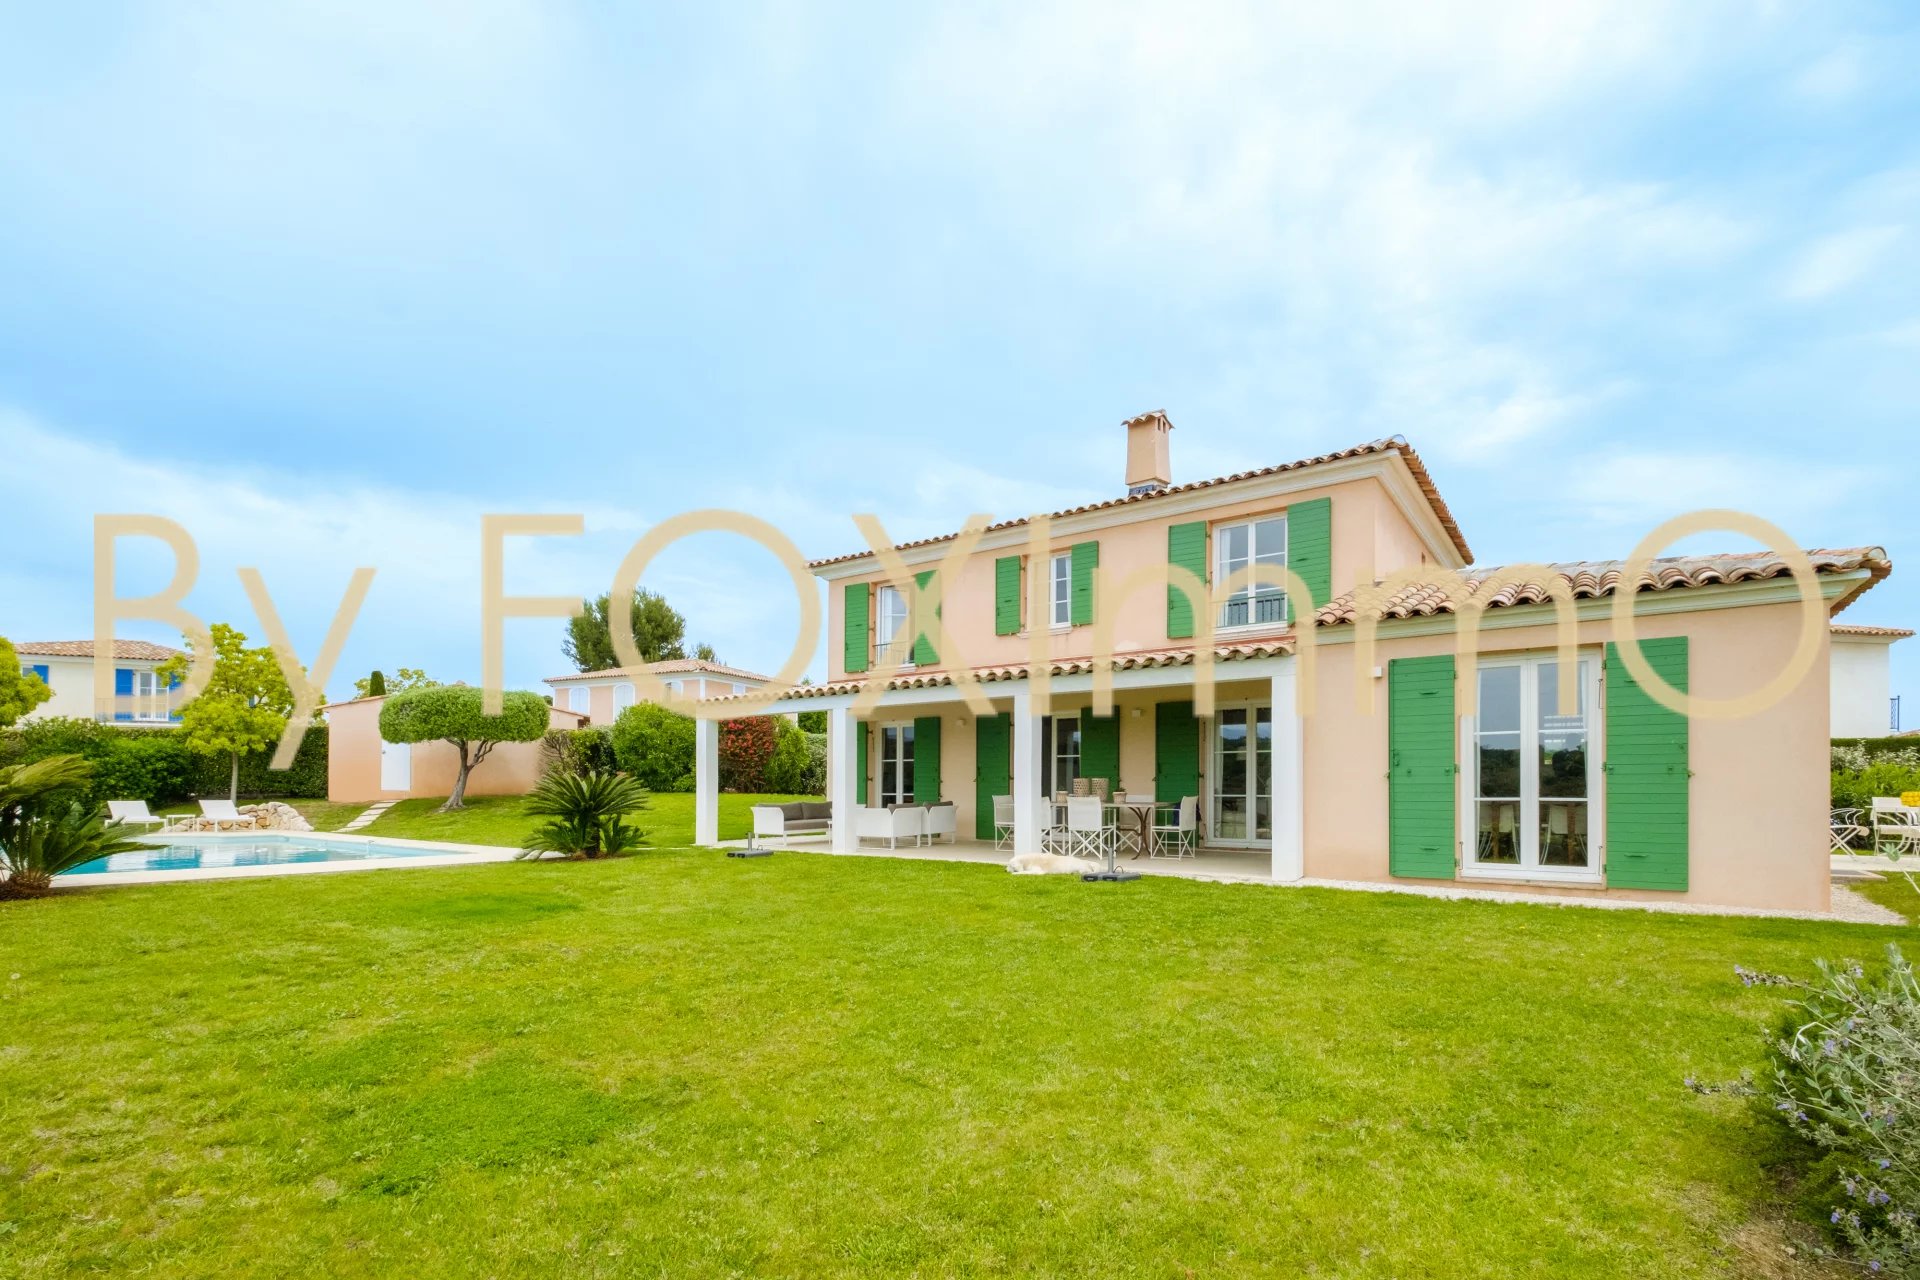 Villeneuve near Biot, Vaugrenier, in a sought-after, secure estate with low charges.